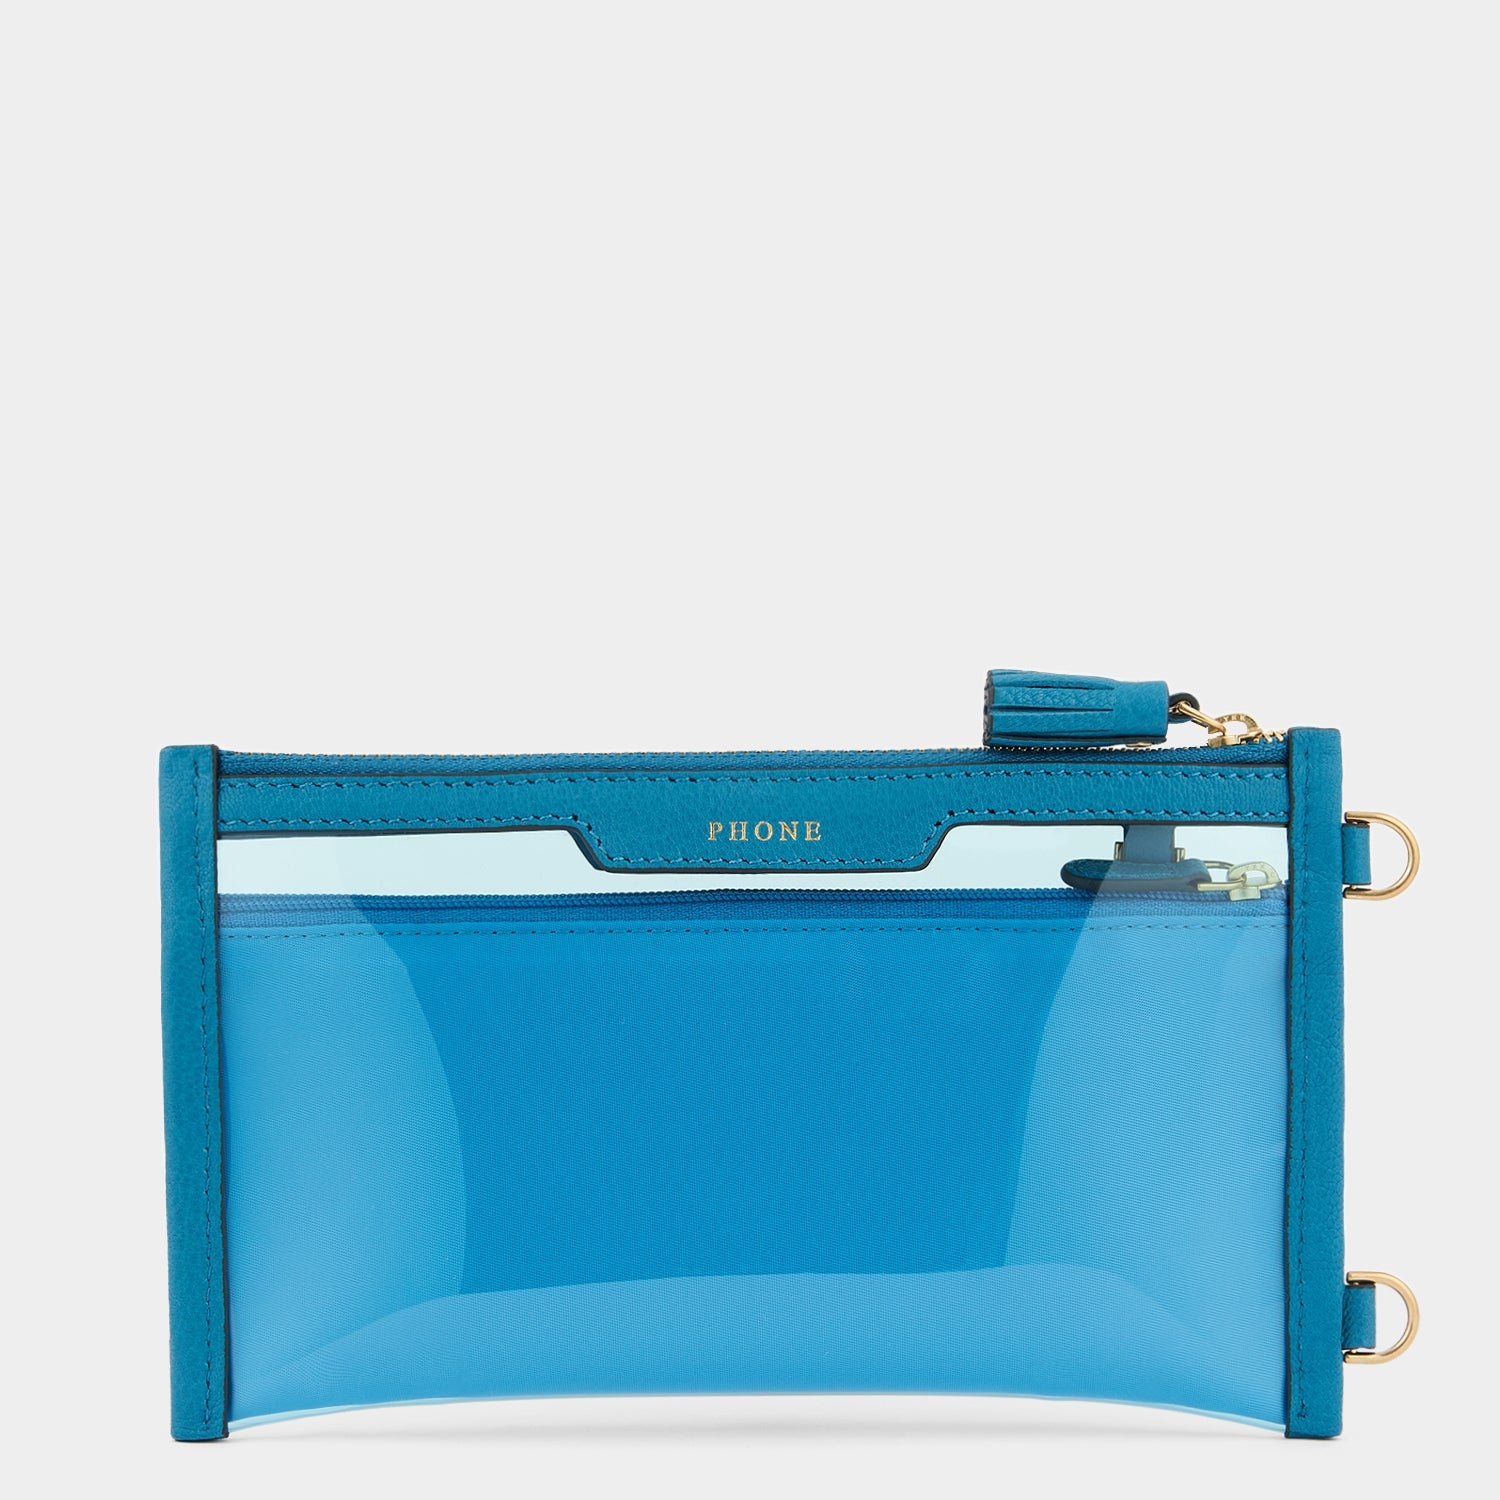 Everything Pouch -

                  
                    Capra Leather in Peacock -
                  

                  Anya Hindmarch US
